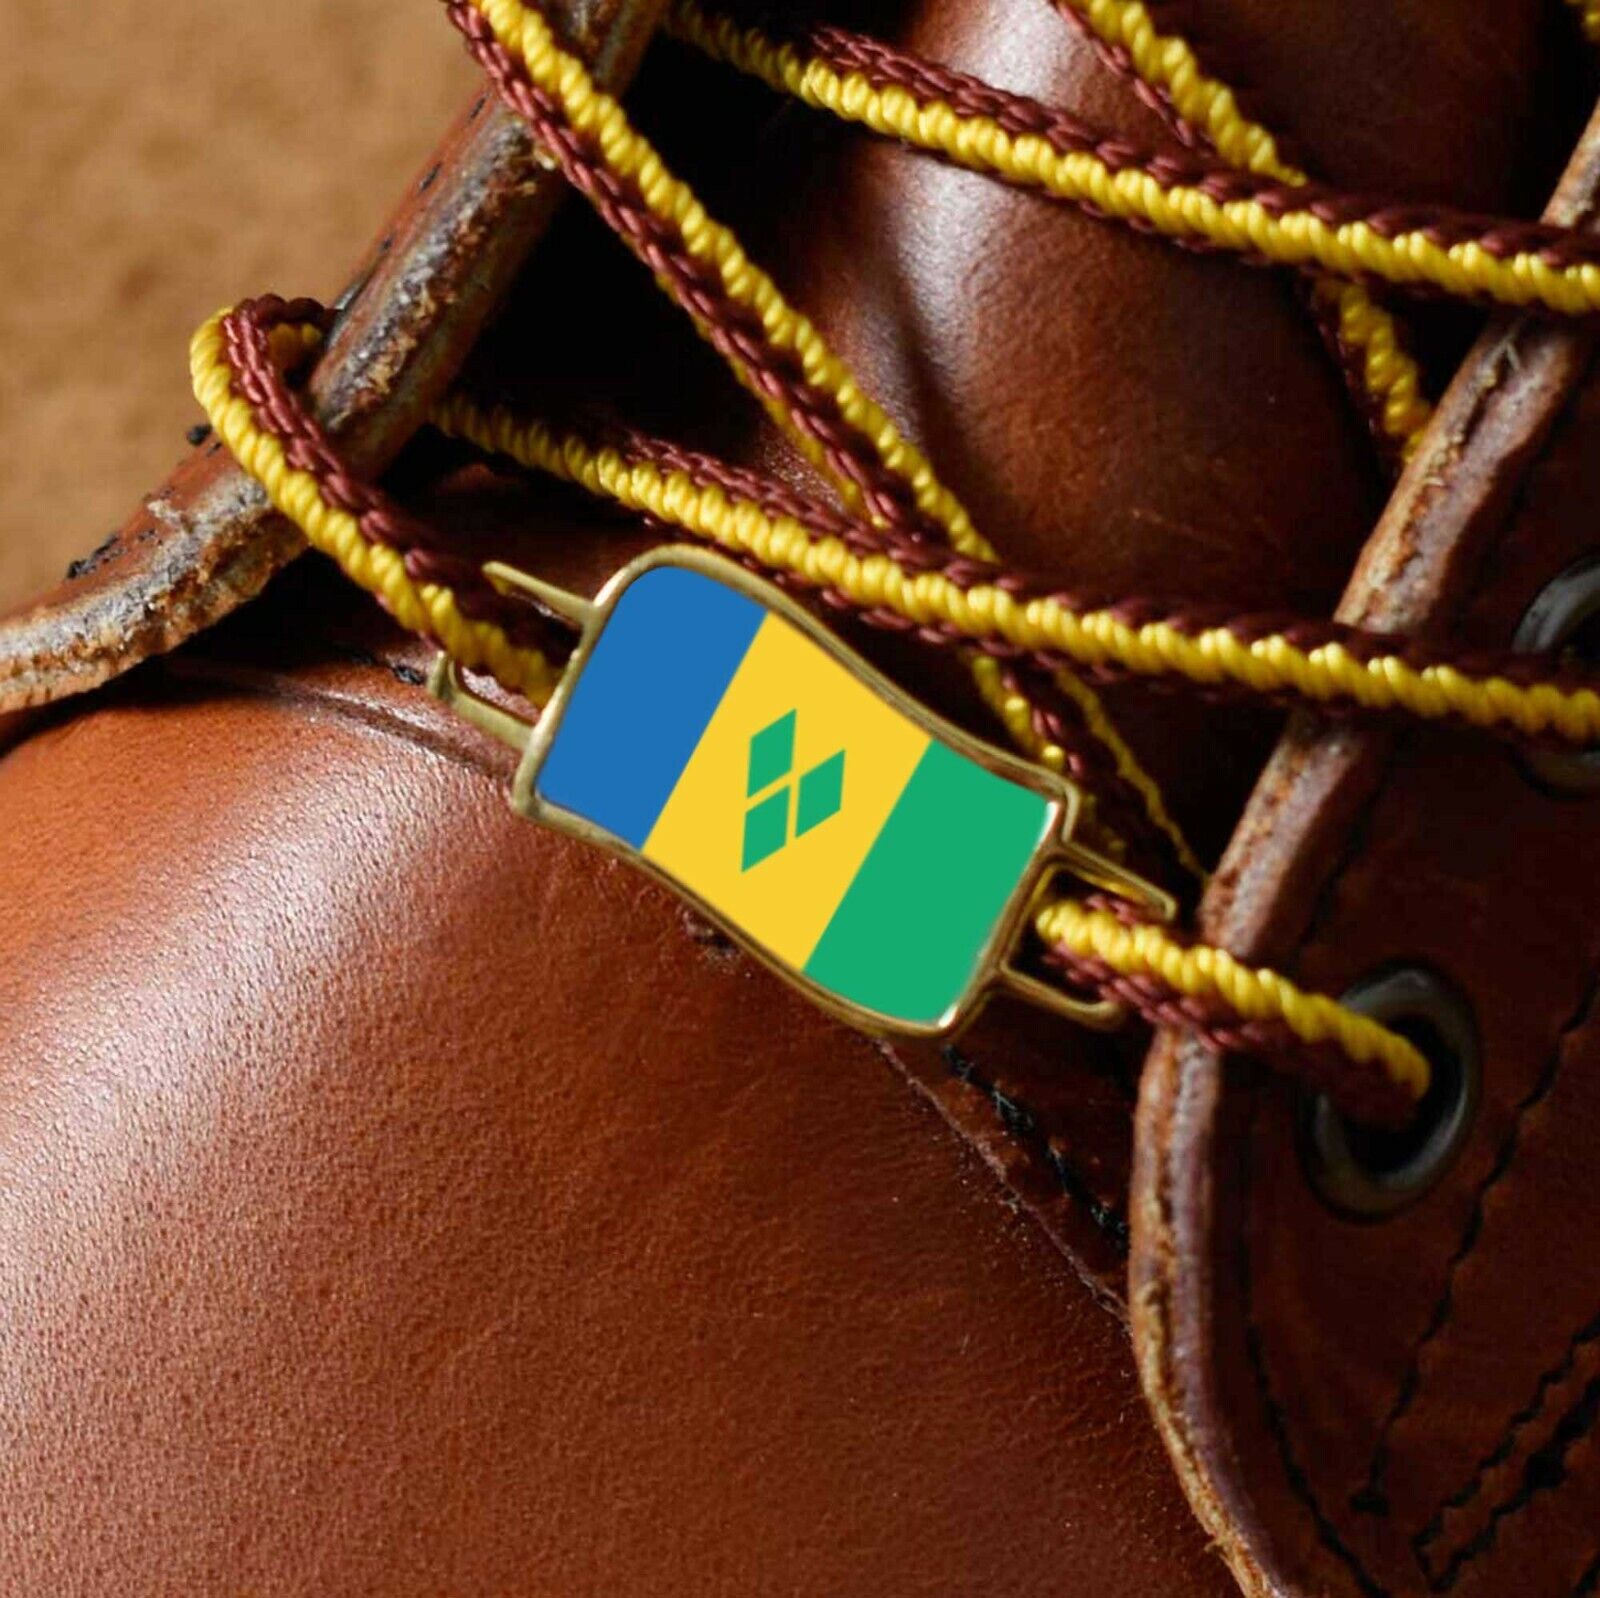 Saint Vincent and the Grenadines Flags Shoes Boot Shoelace Keeper Holder Charm BrooklynMaker